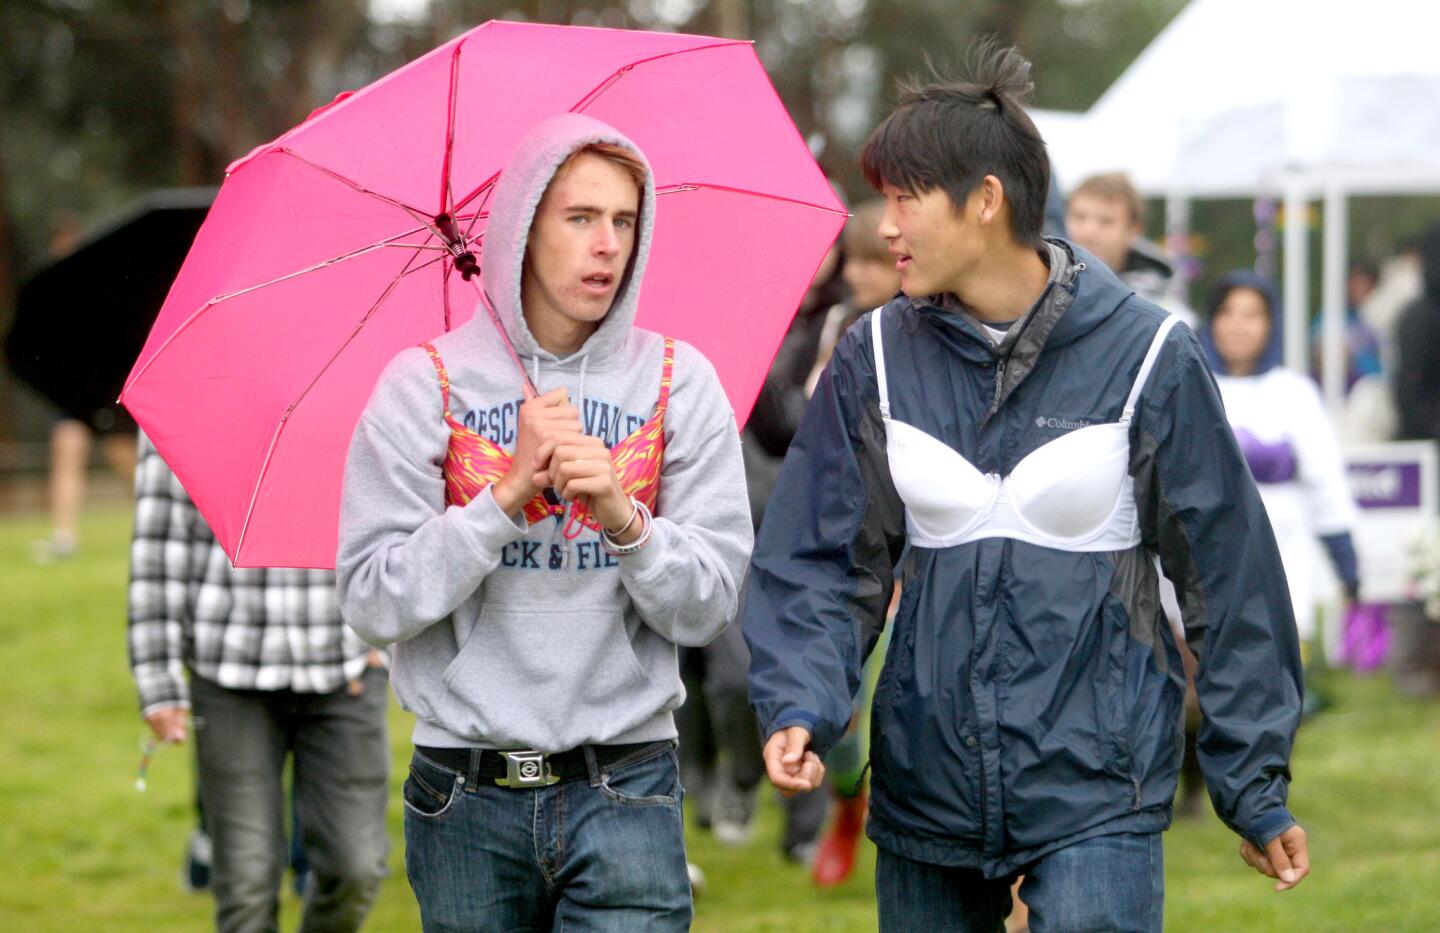 Photo Gallery: Rain no obstacle for annual Relay for Life of Foothills at Clark Magnet High School